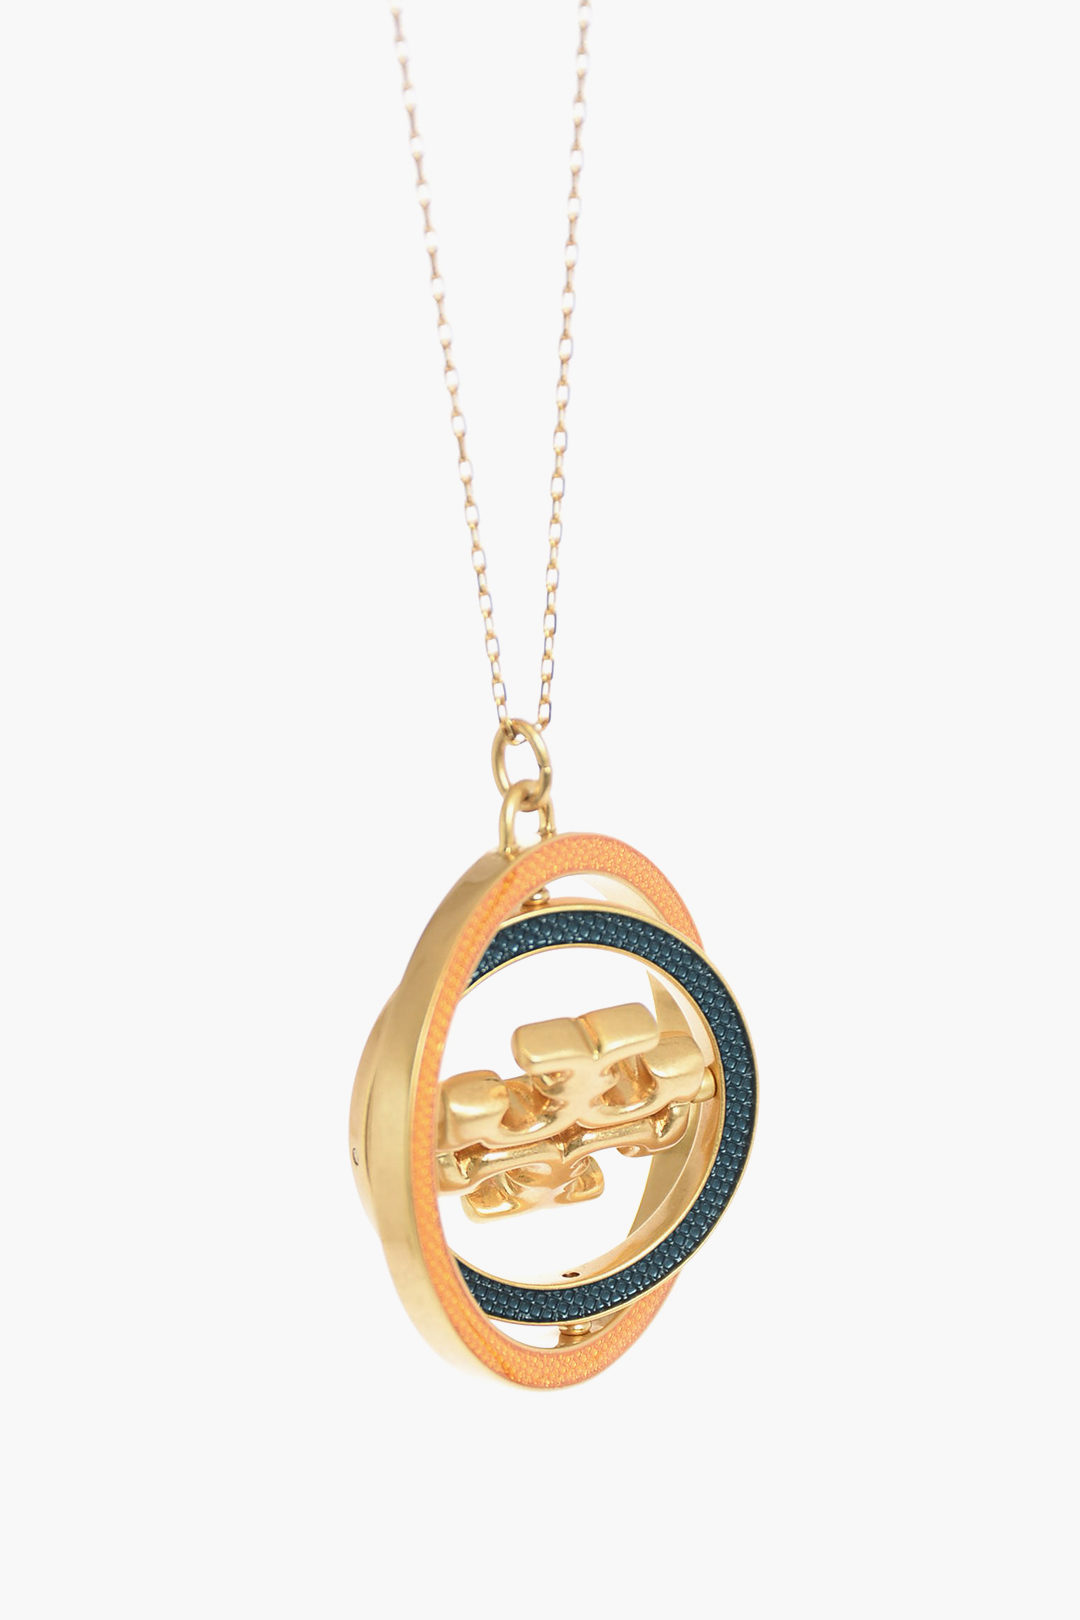 Tory Burch Brass Necklace with Pendant women - Glamood Outlet